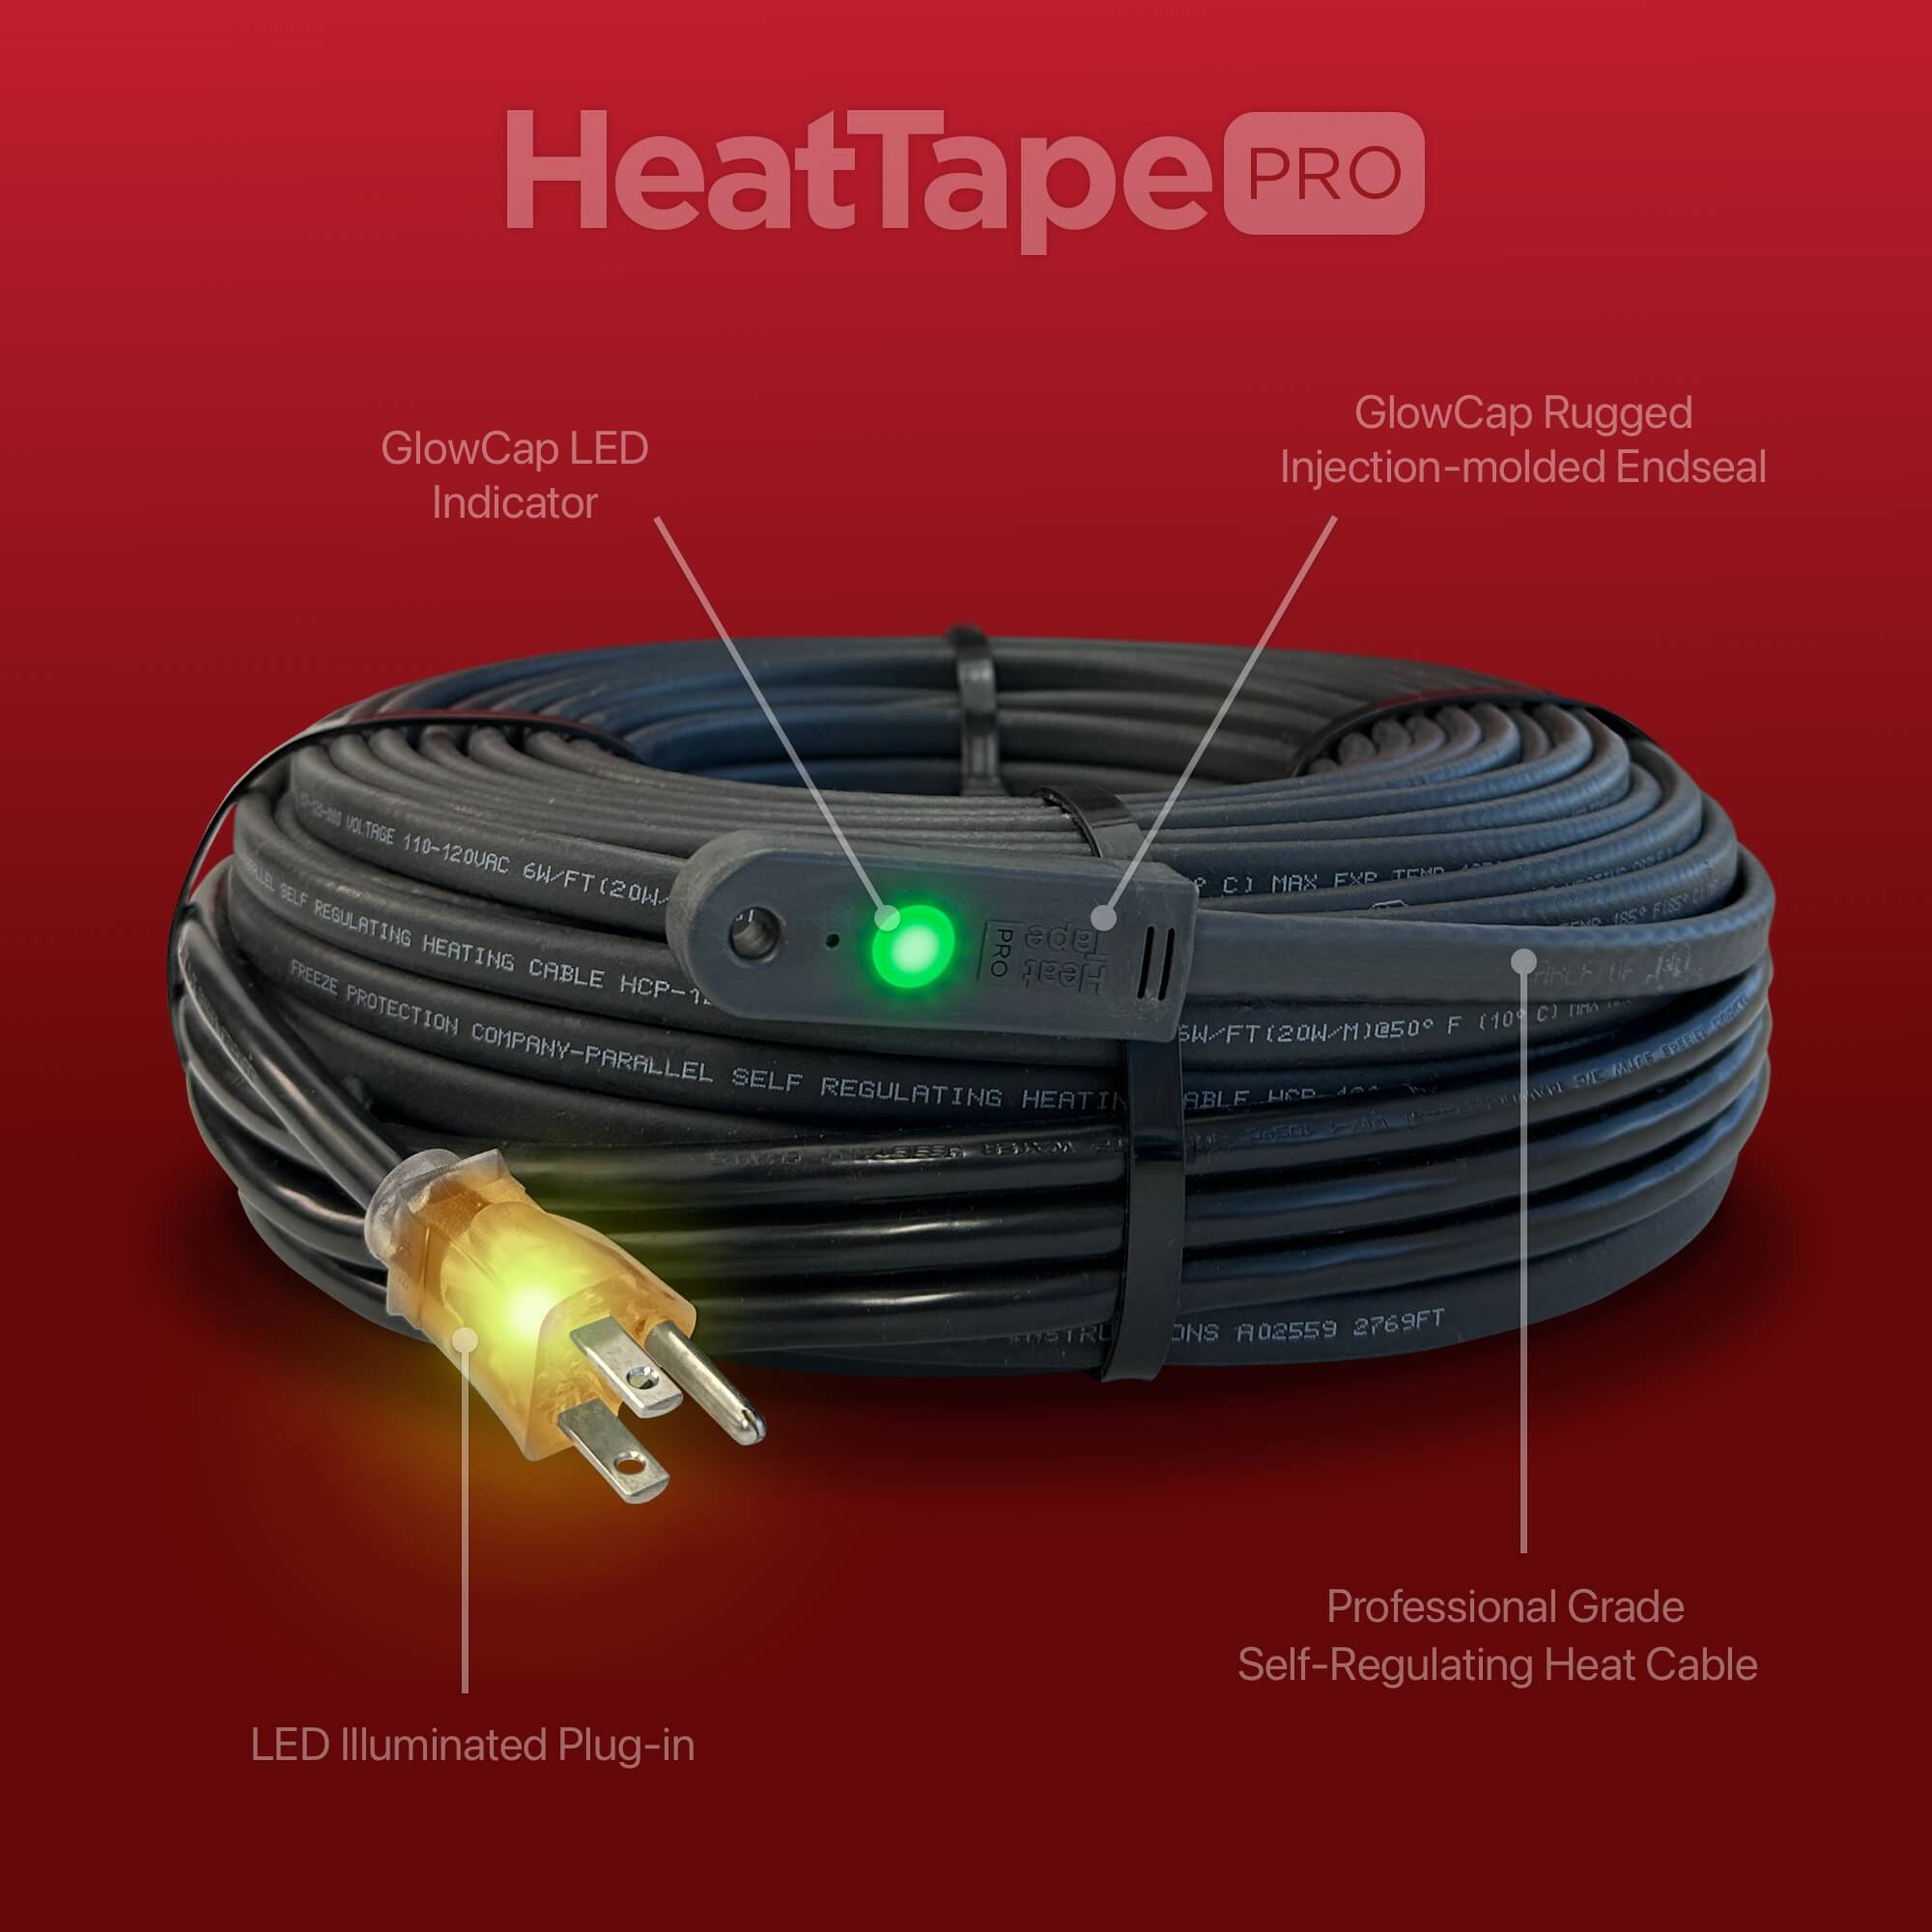 50 ft Extension Cord with Connector Safety Seal Protector